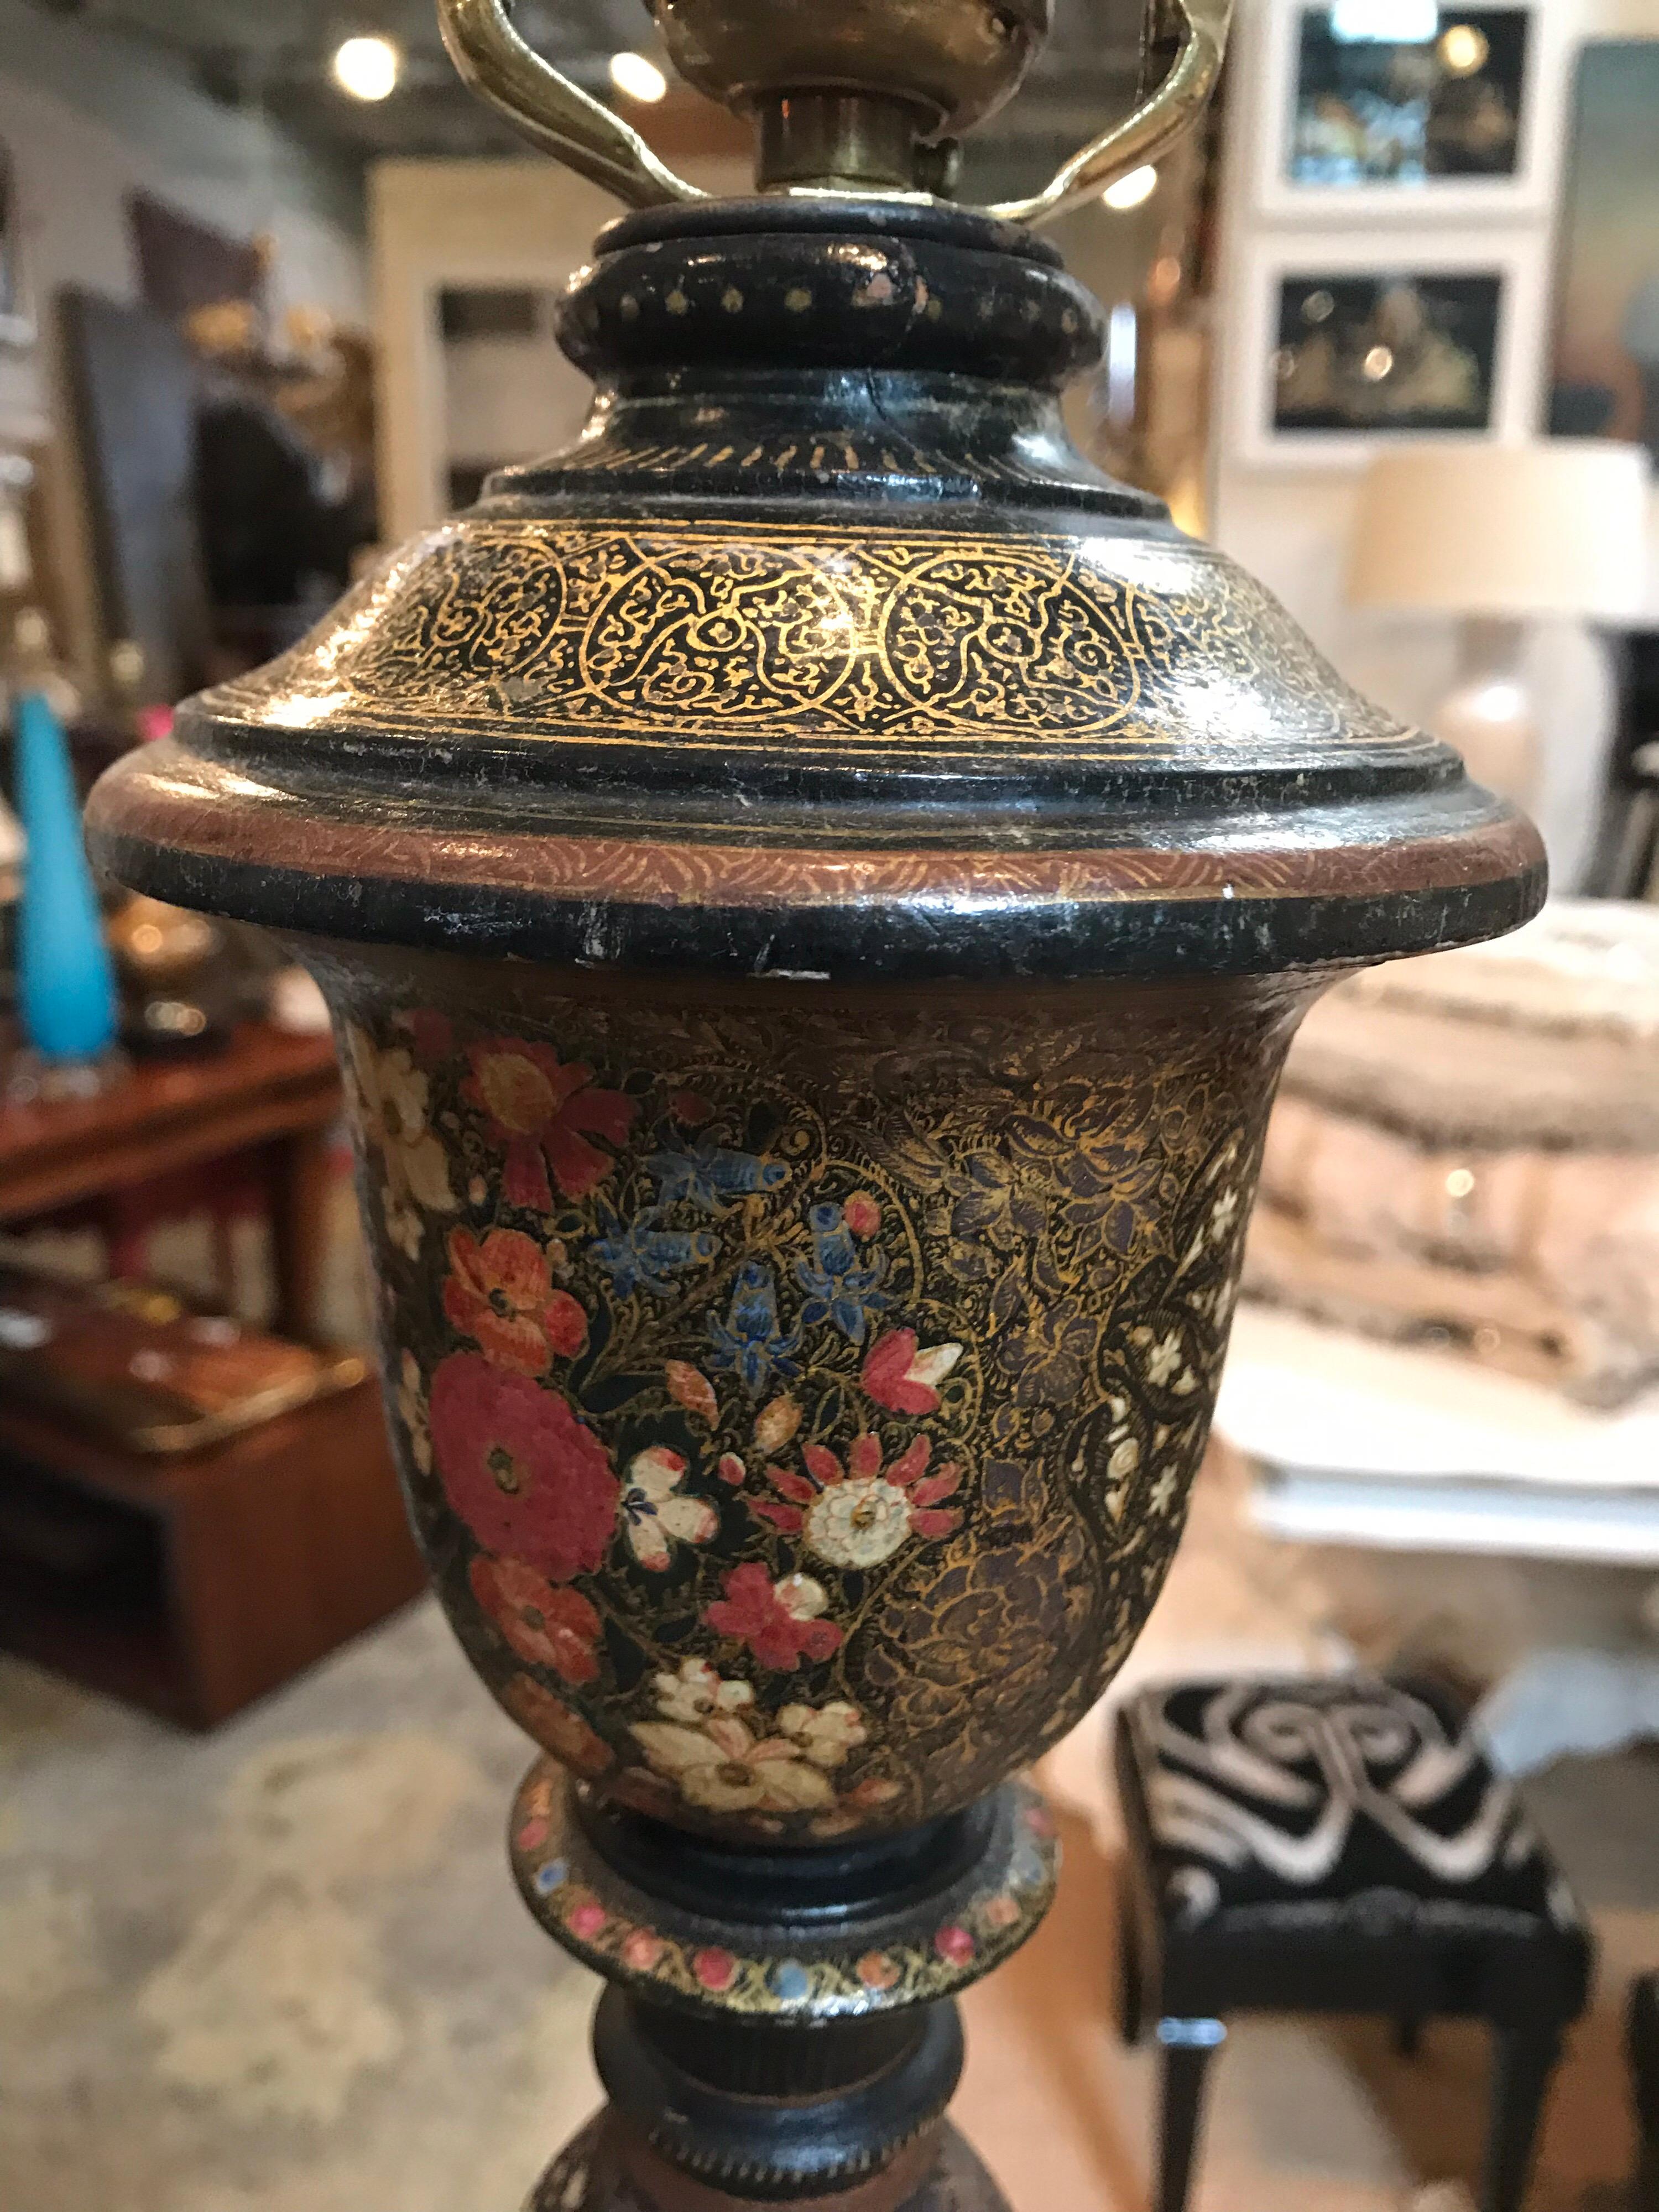 This Indian Kashmir lacquered floor lamp has a twisting stem that starts at the base and leads all the way up to the top. The background color of the Kashmir is dark while bright, colorful images of stars, flowers and patterns pop out in the